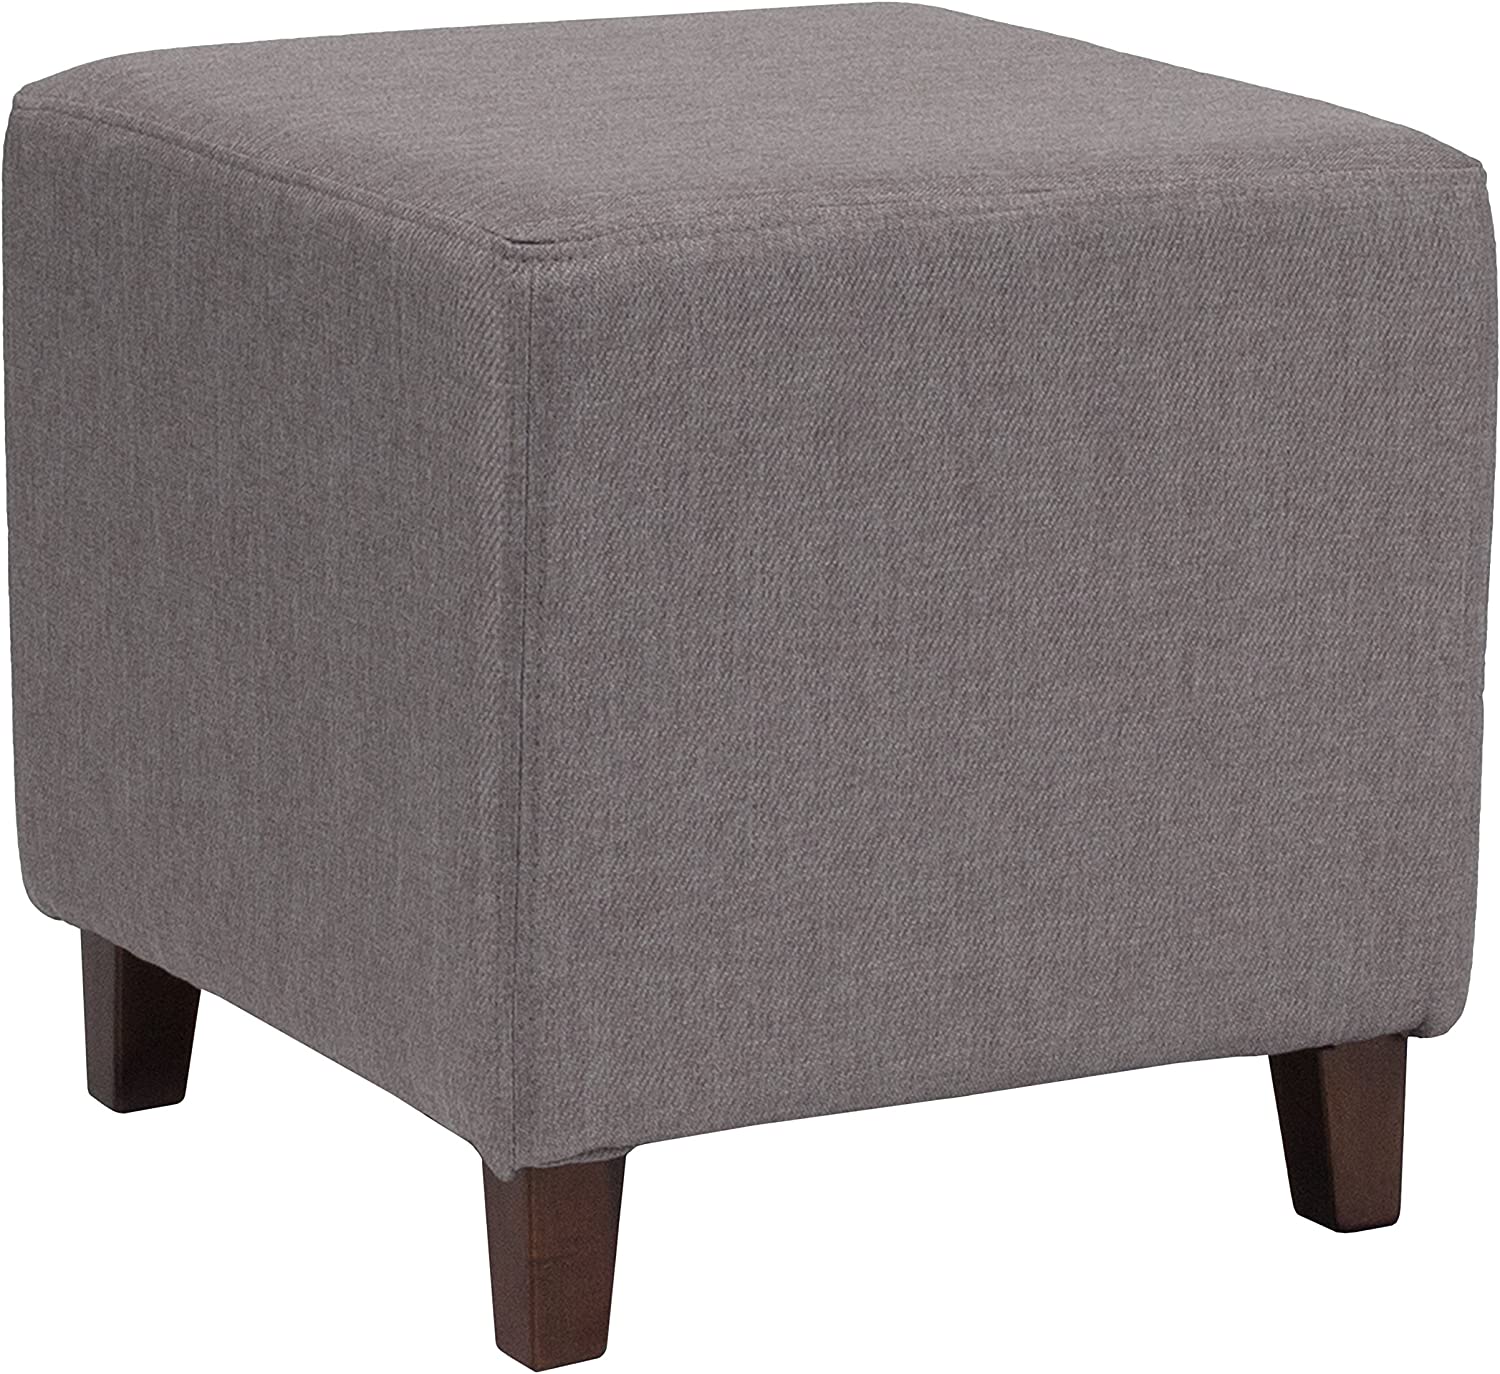 Flash Furniture Avendale Tufted Upholstered Ottoman Pouf in Beige Fabric